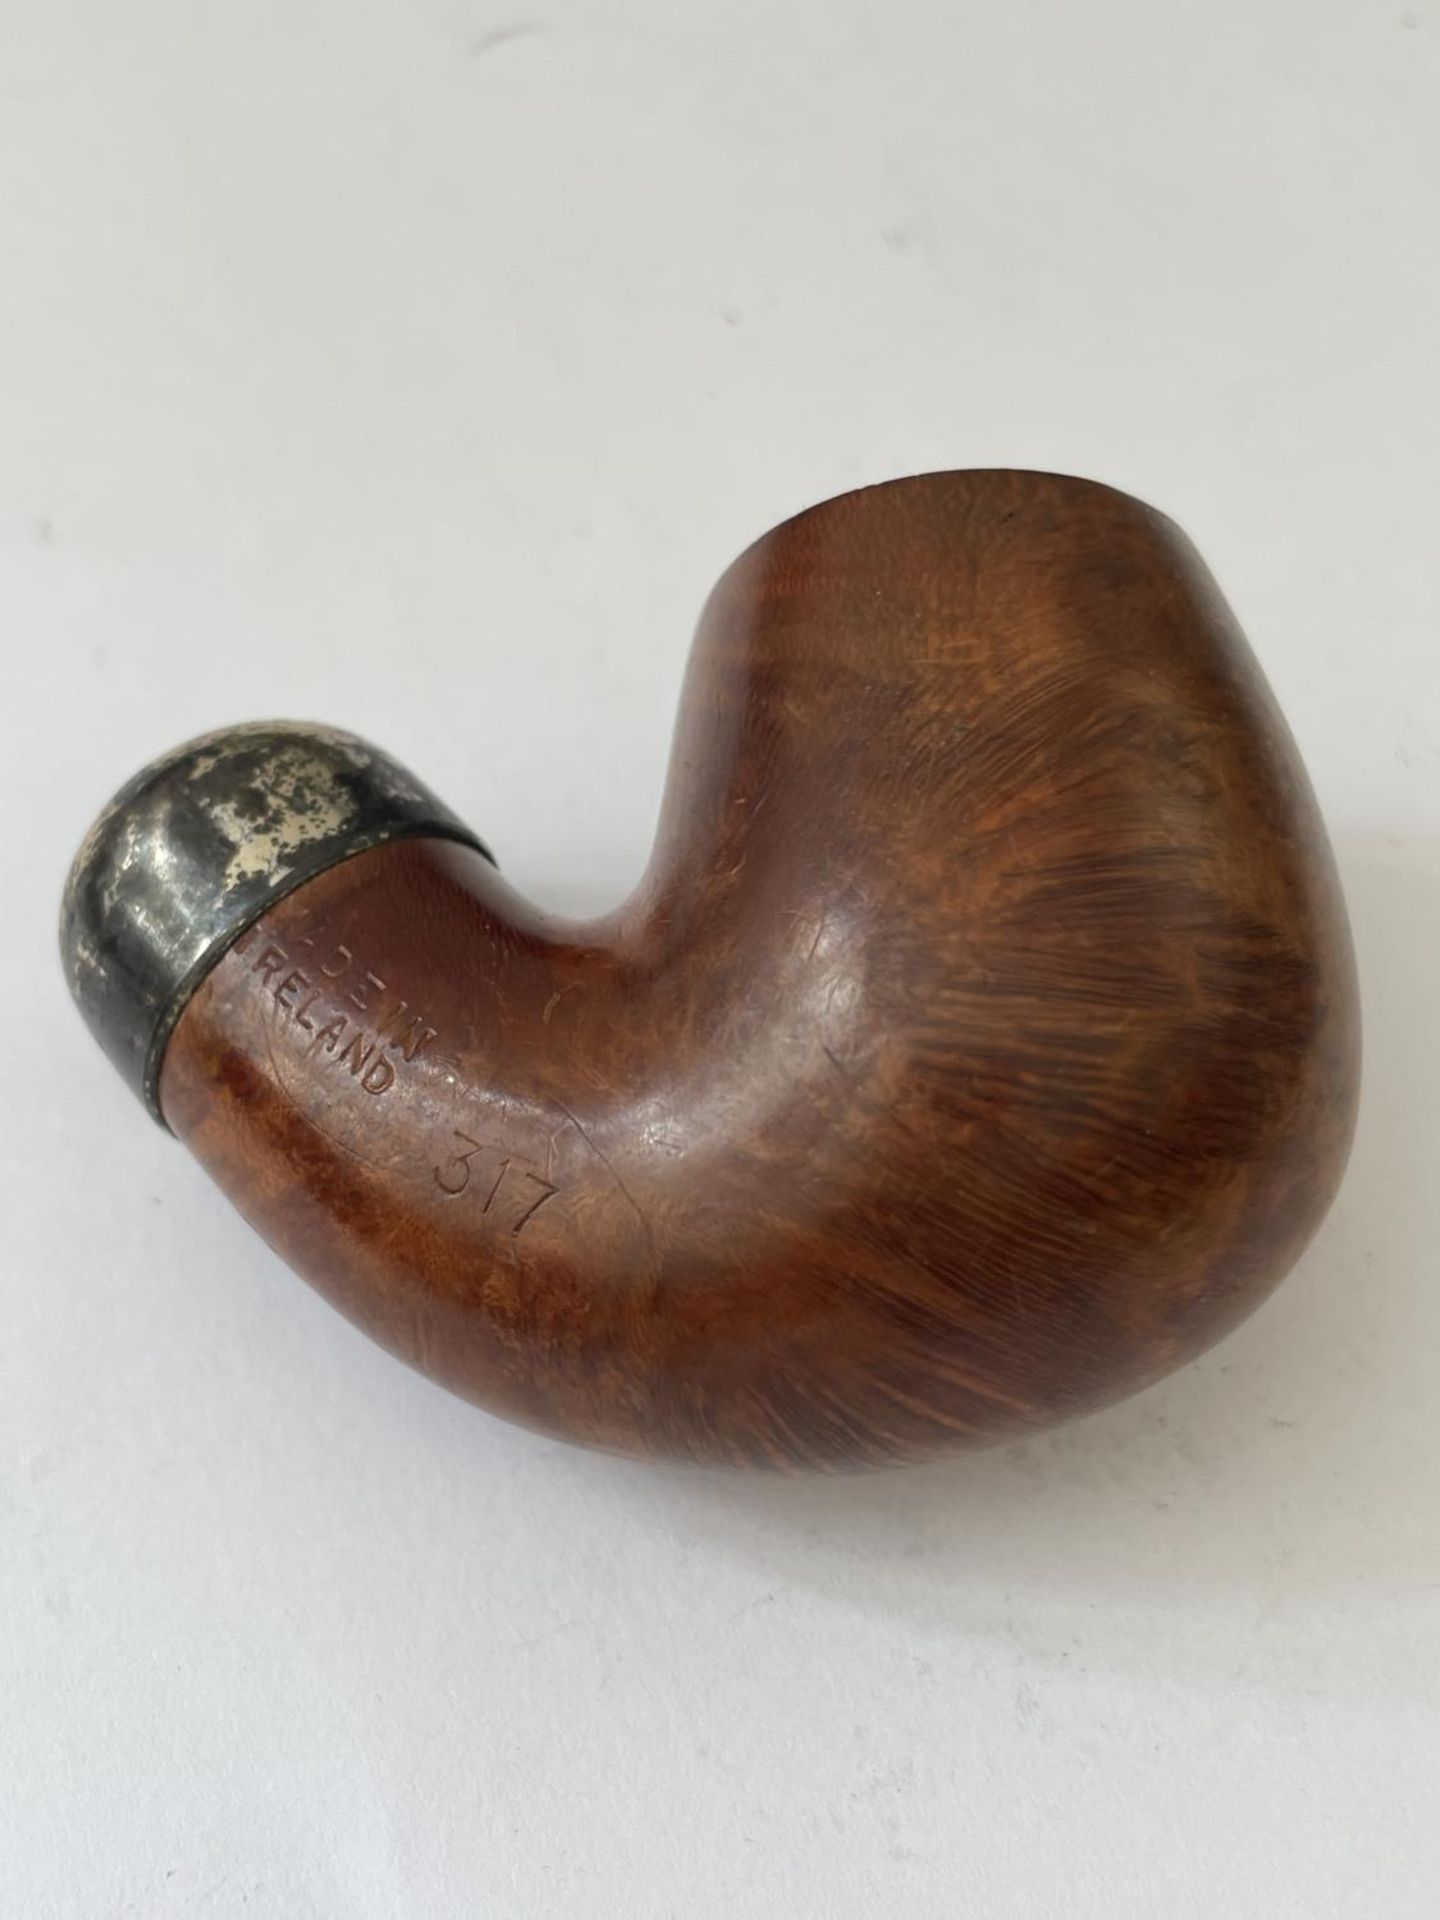 A PETERSONS SYSTEM PREMIER 317 PIPE BASE DUBLIN WITH STERLING SILVER COLLAR